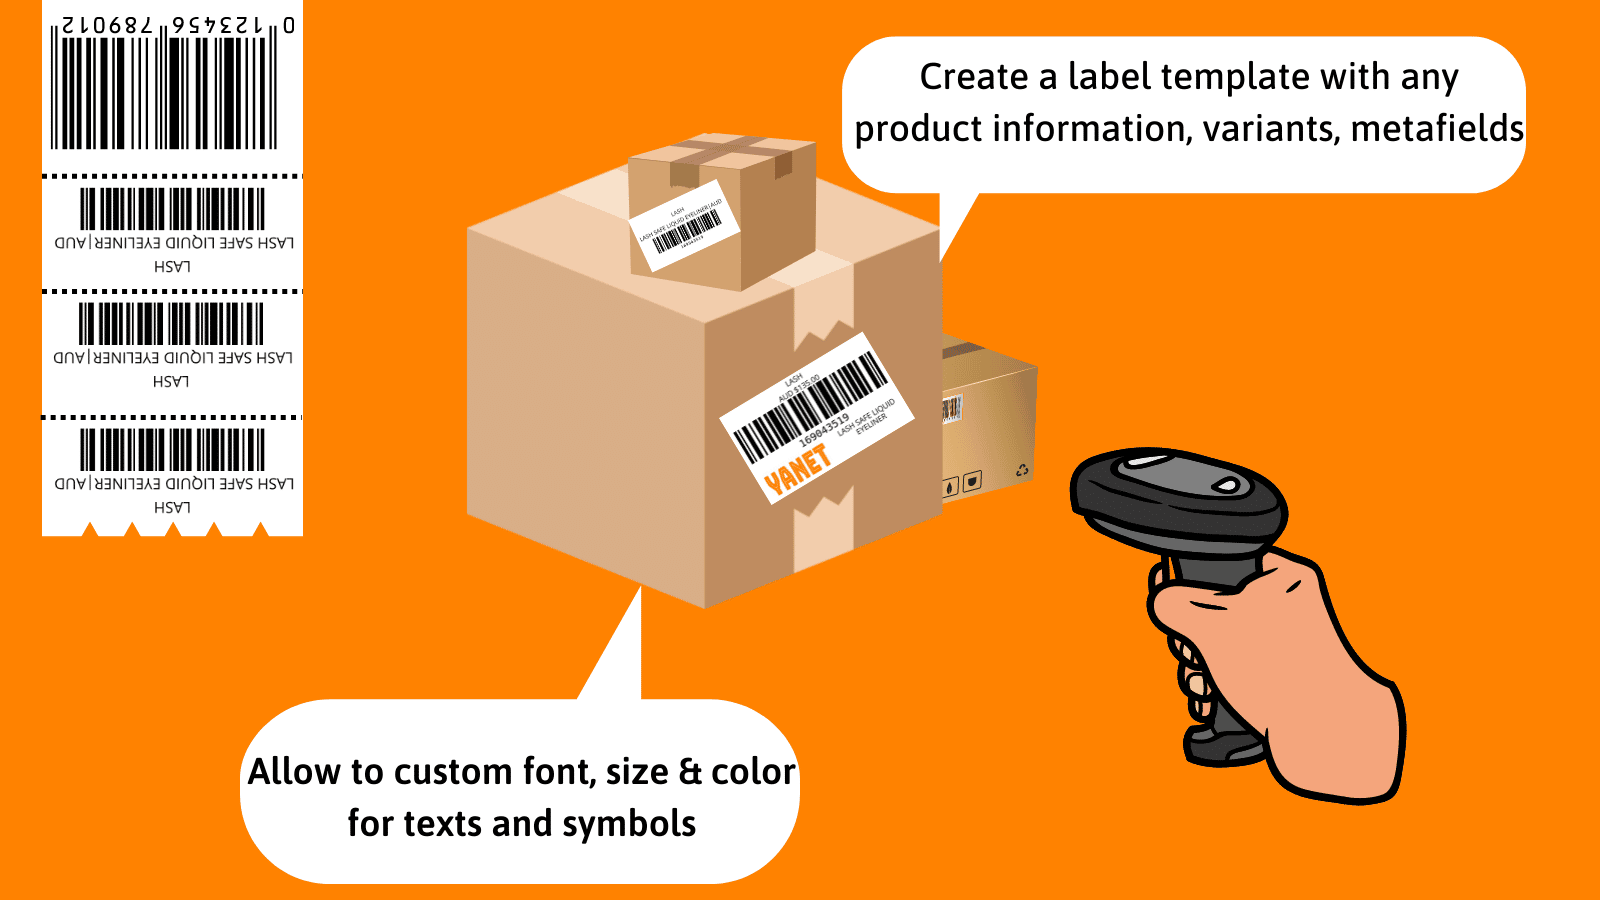 Yanet: Barcode Labels